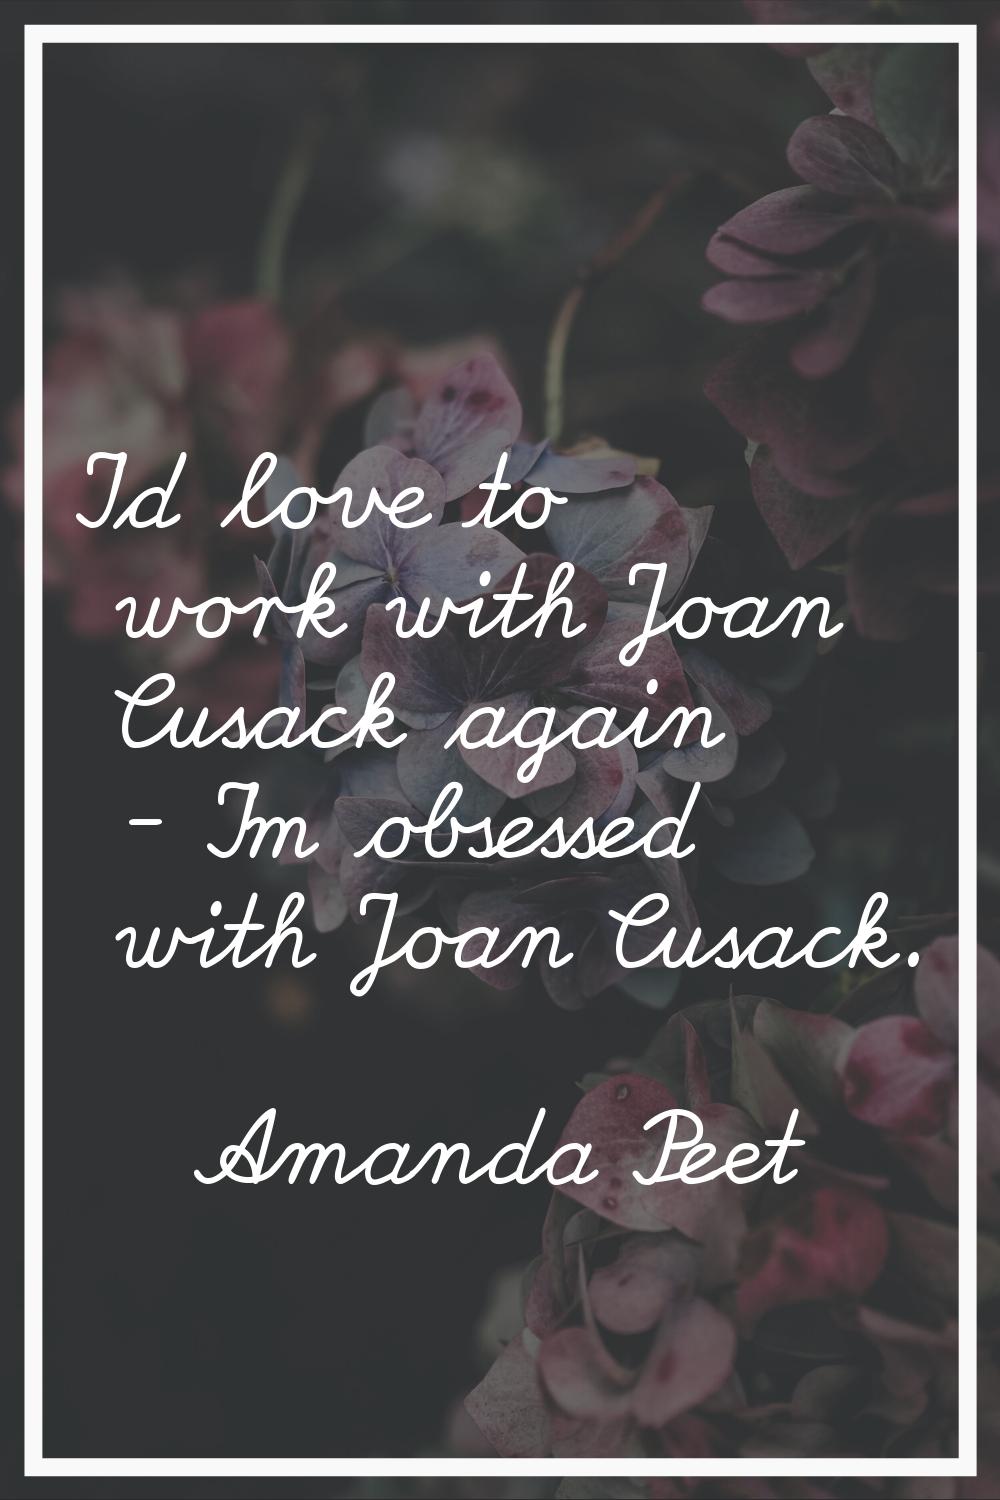 I'd love to work with Joan Cusack again - I'm obsessed with Joan Cusack.